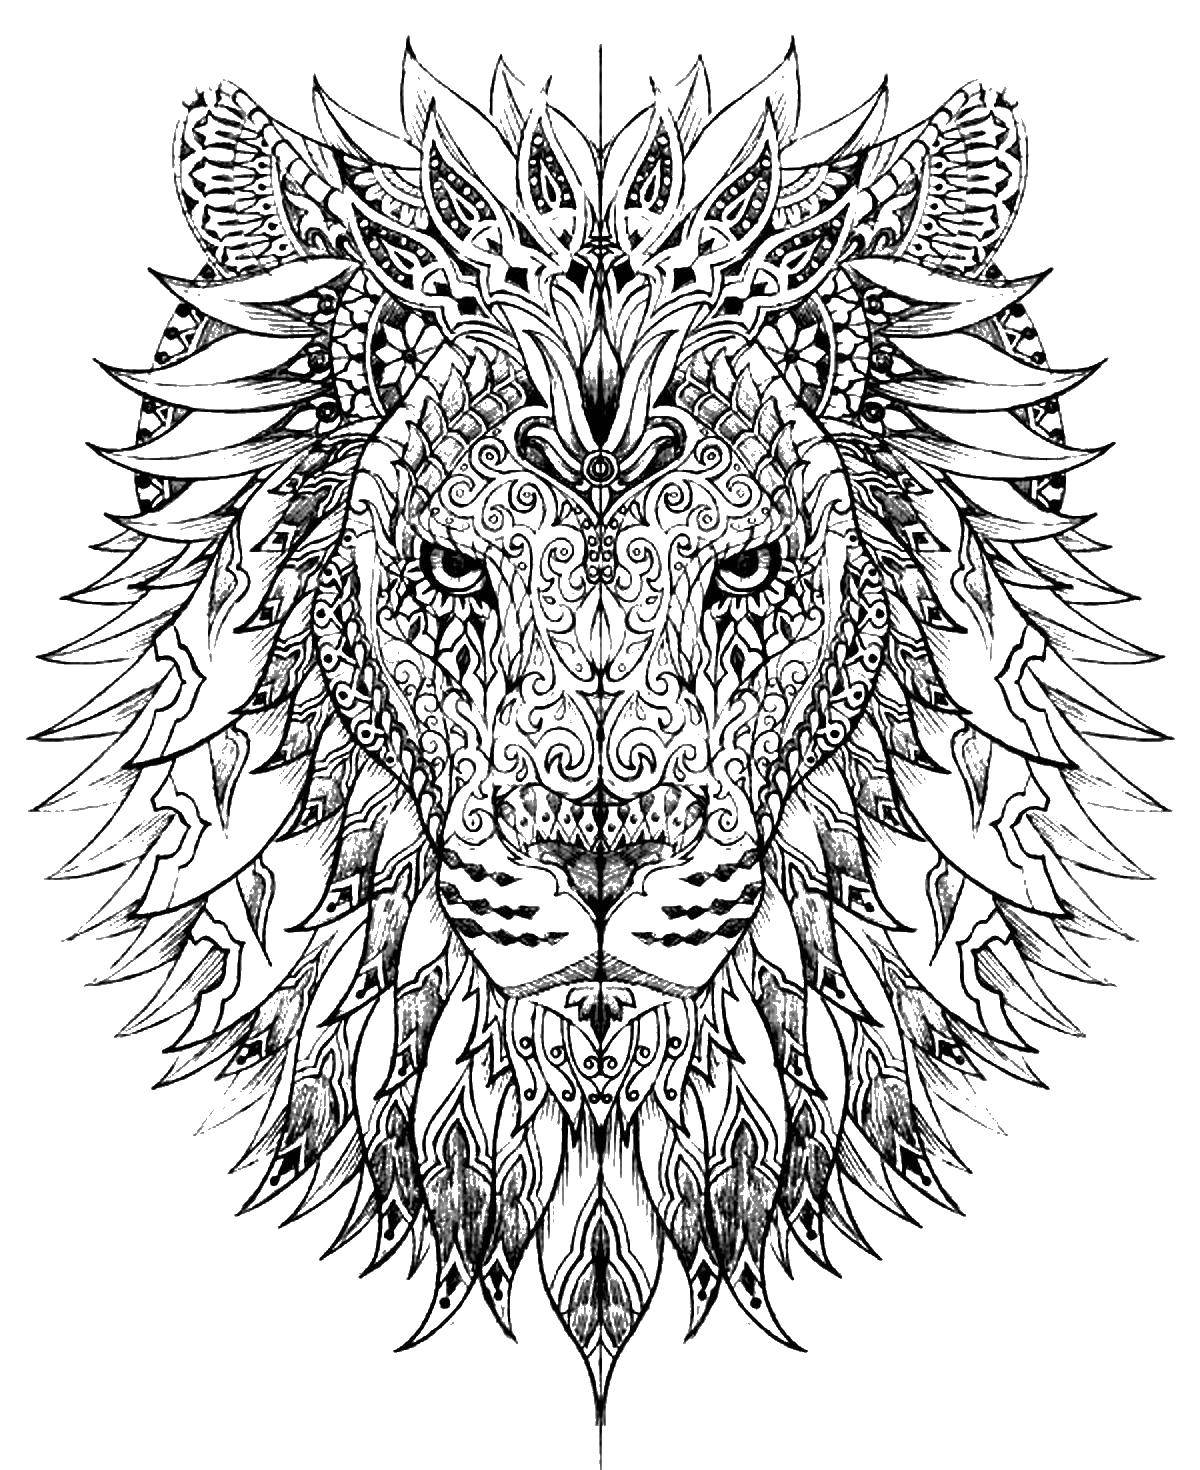 Coloring Patterned lion. Category Animals. Tags:  animals, lions, lion, mane.